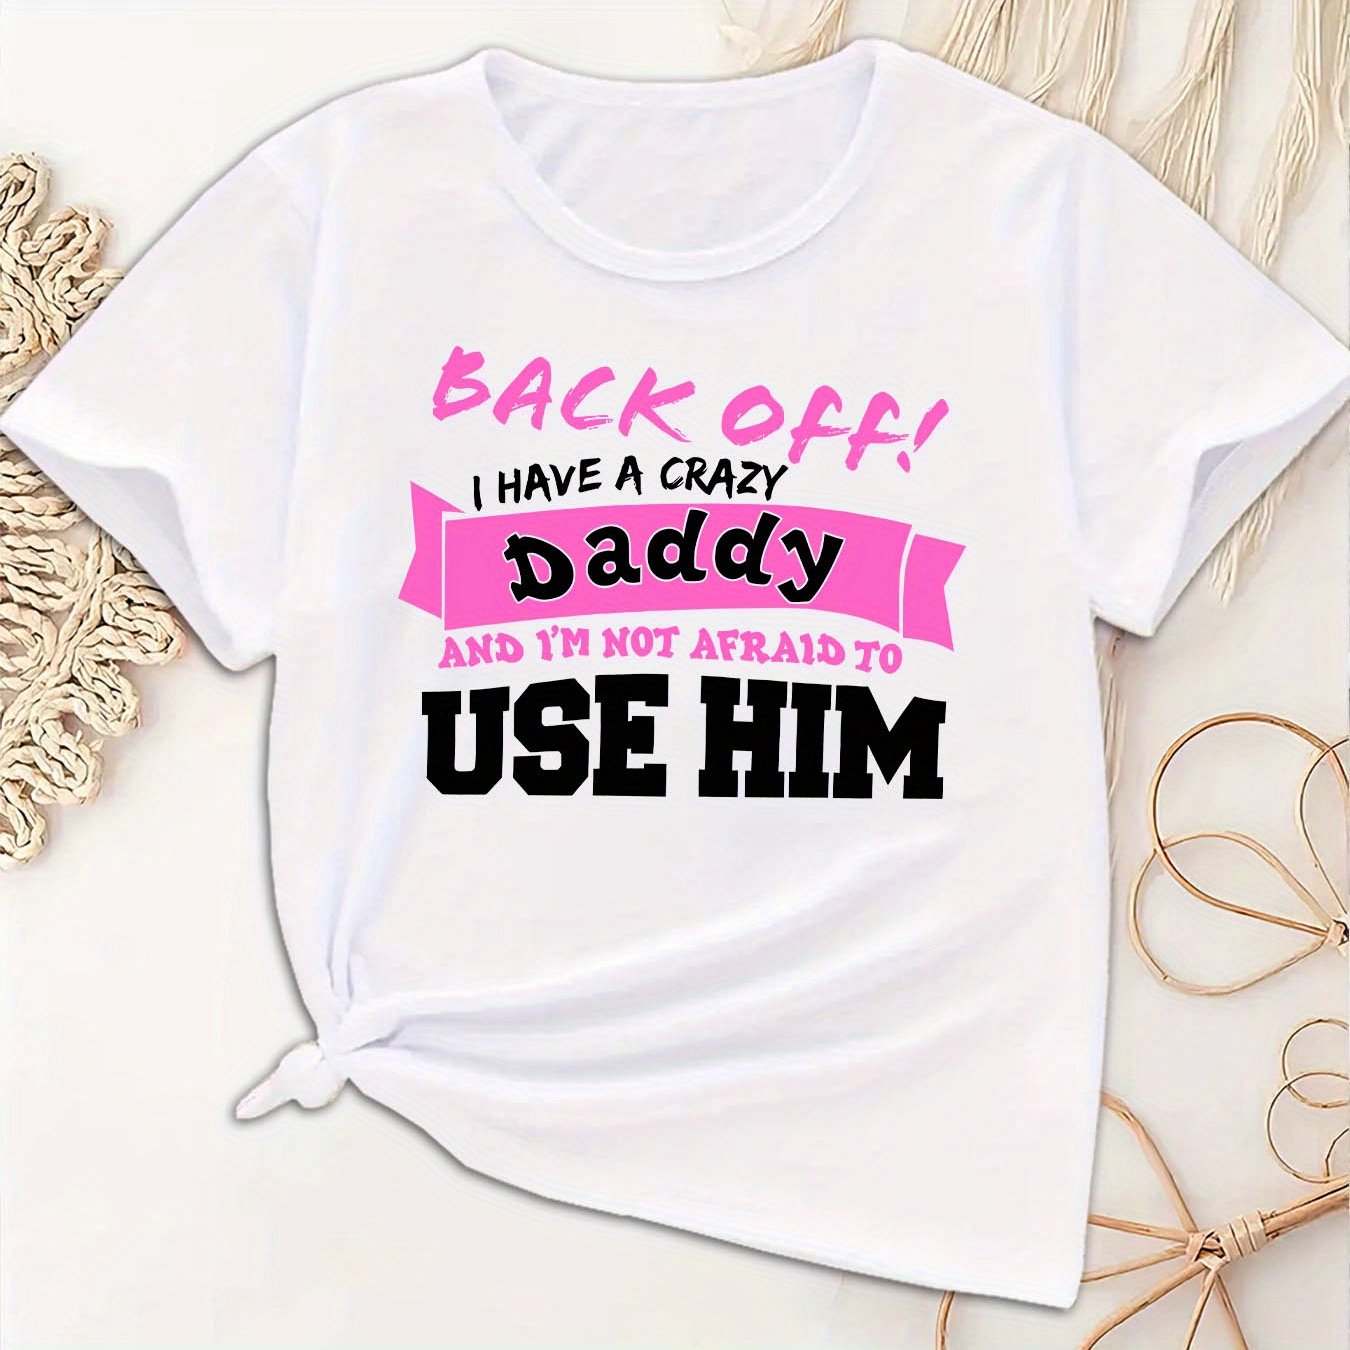 

I Have A Crazy Daddy Print, Girls' Comfy & Stylish Short Sleeve Crew Neck Tee For Spring & Summer, Girls' Clothes For Father's Day